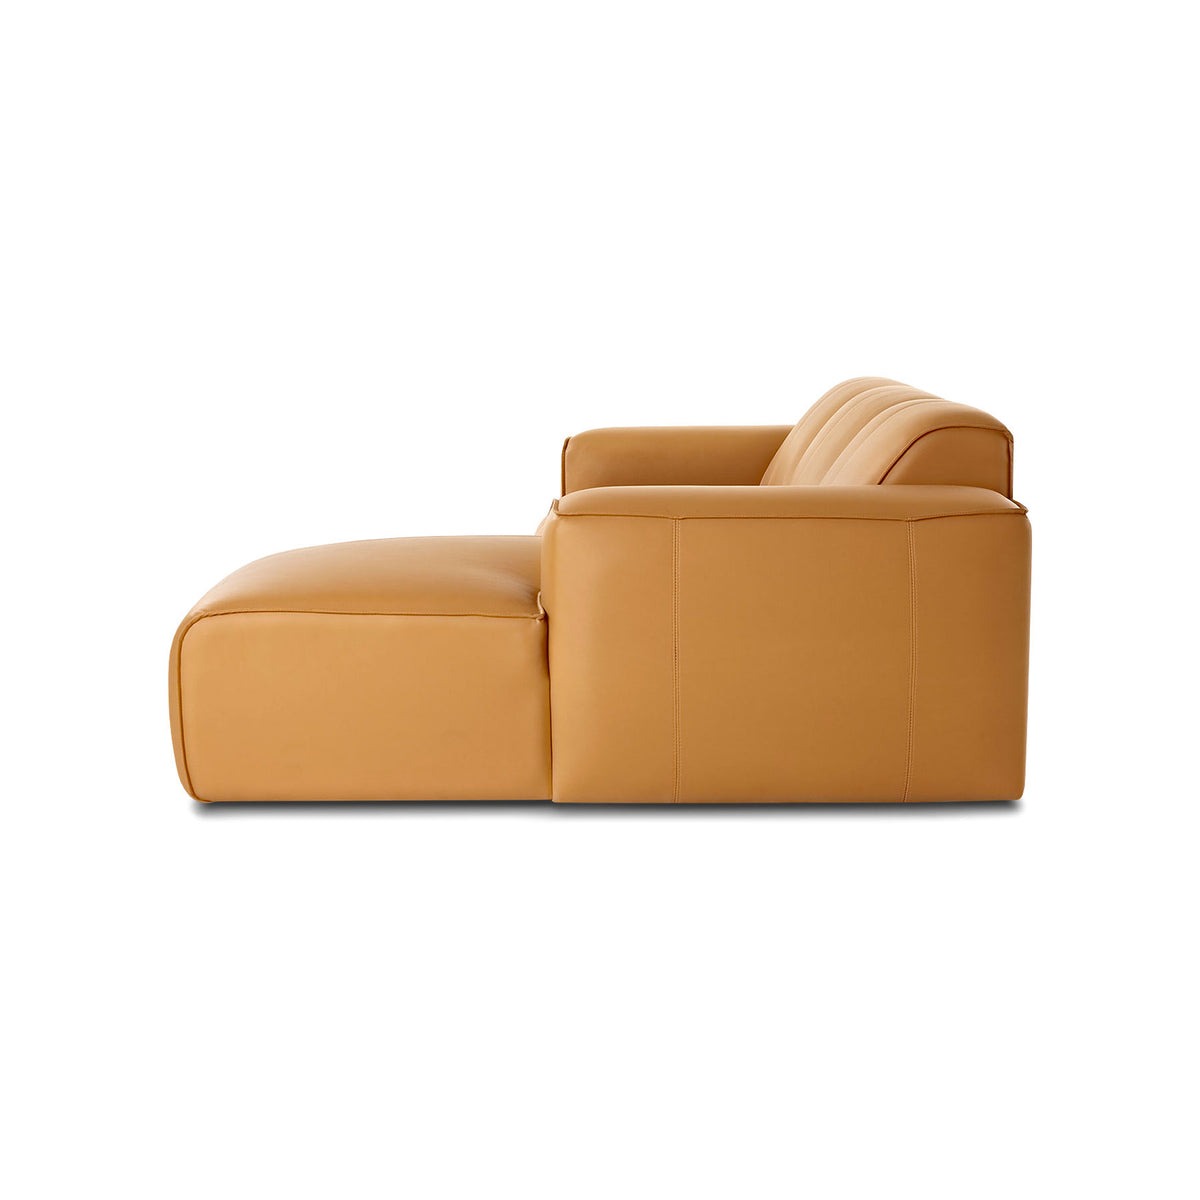 Werfo August 3-Seater Sofa Tan RHS (Left Hand Side)